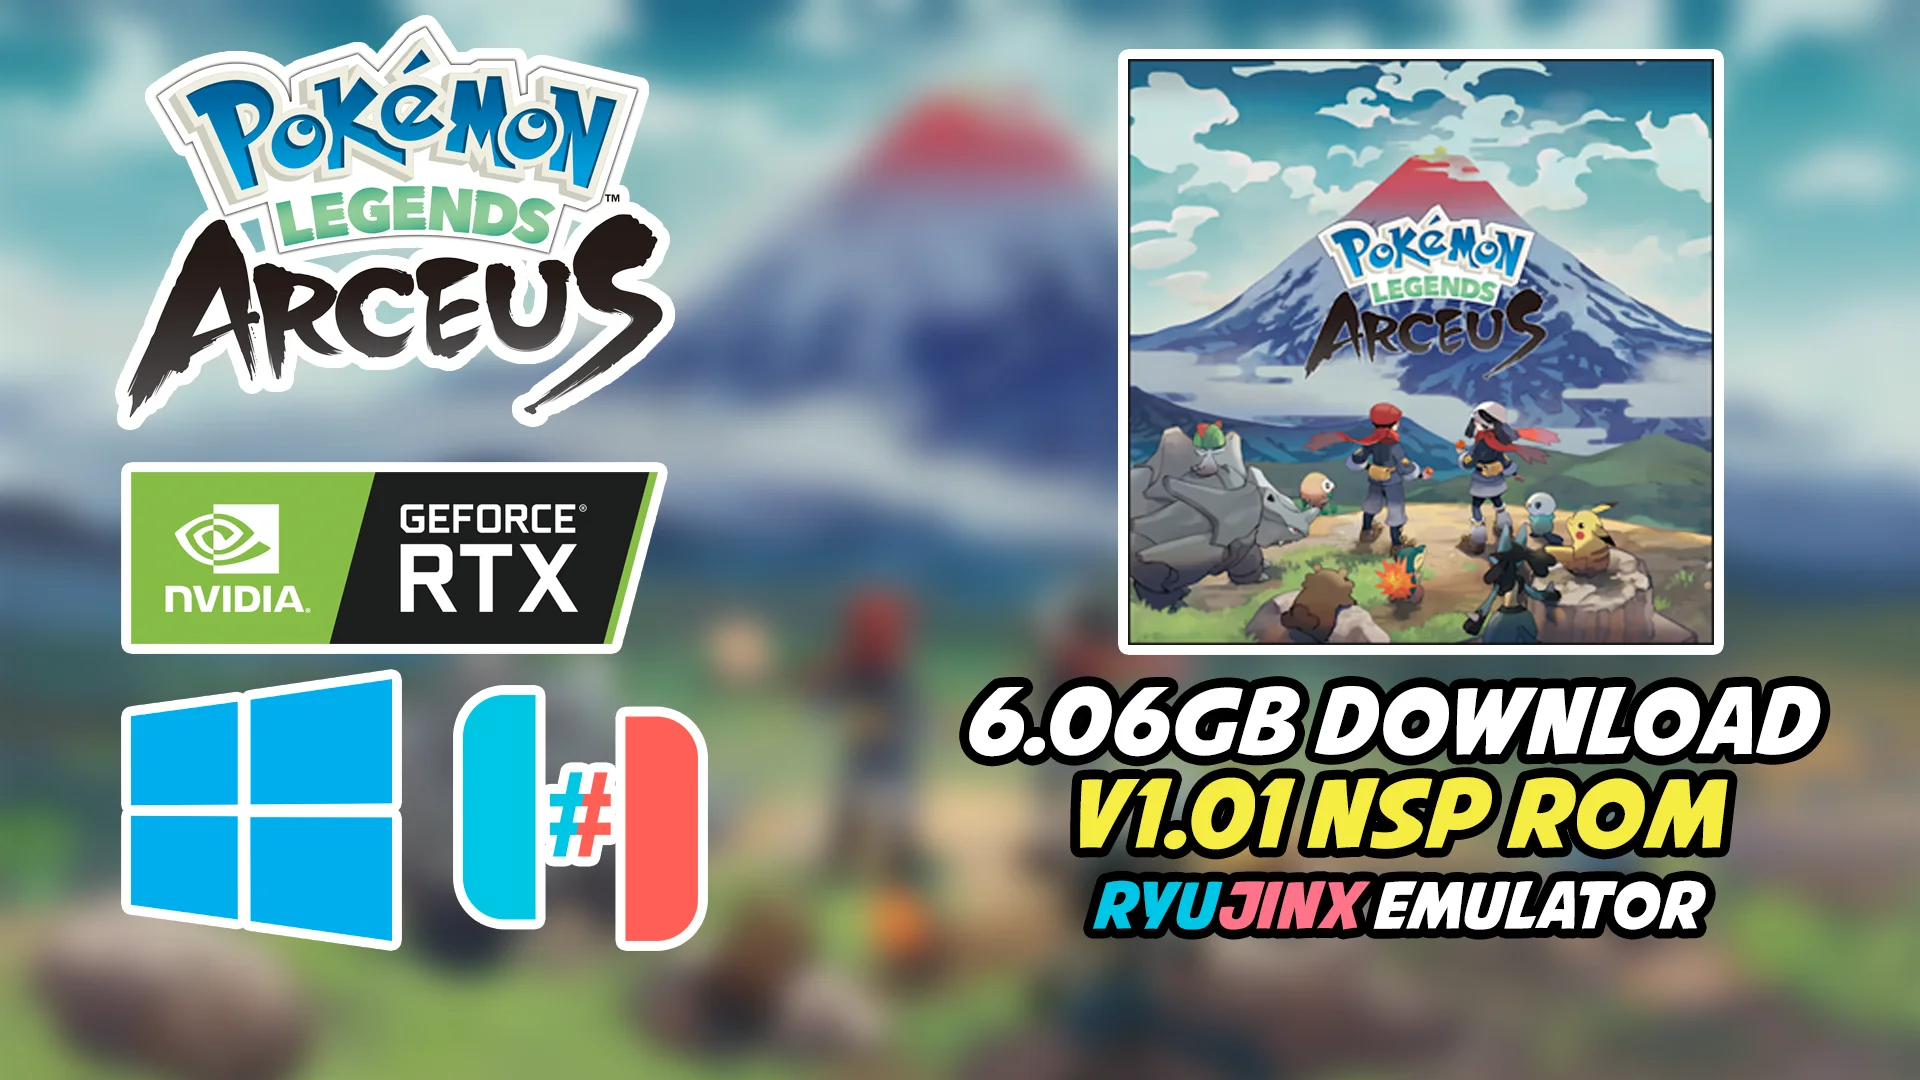 Wanna check Pokémon Legends: Arceus on the Ryujinx emulator at 60FPS and  4K? Video/Streaming